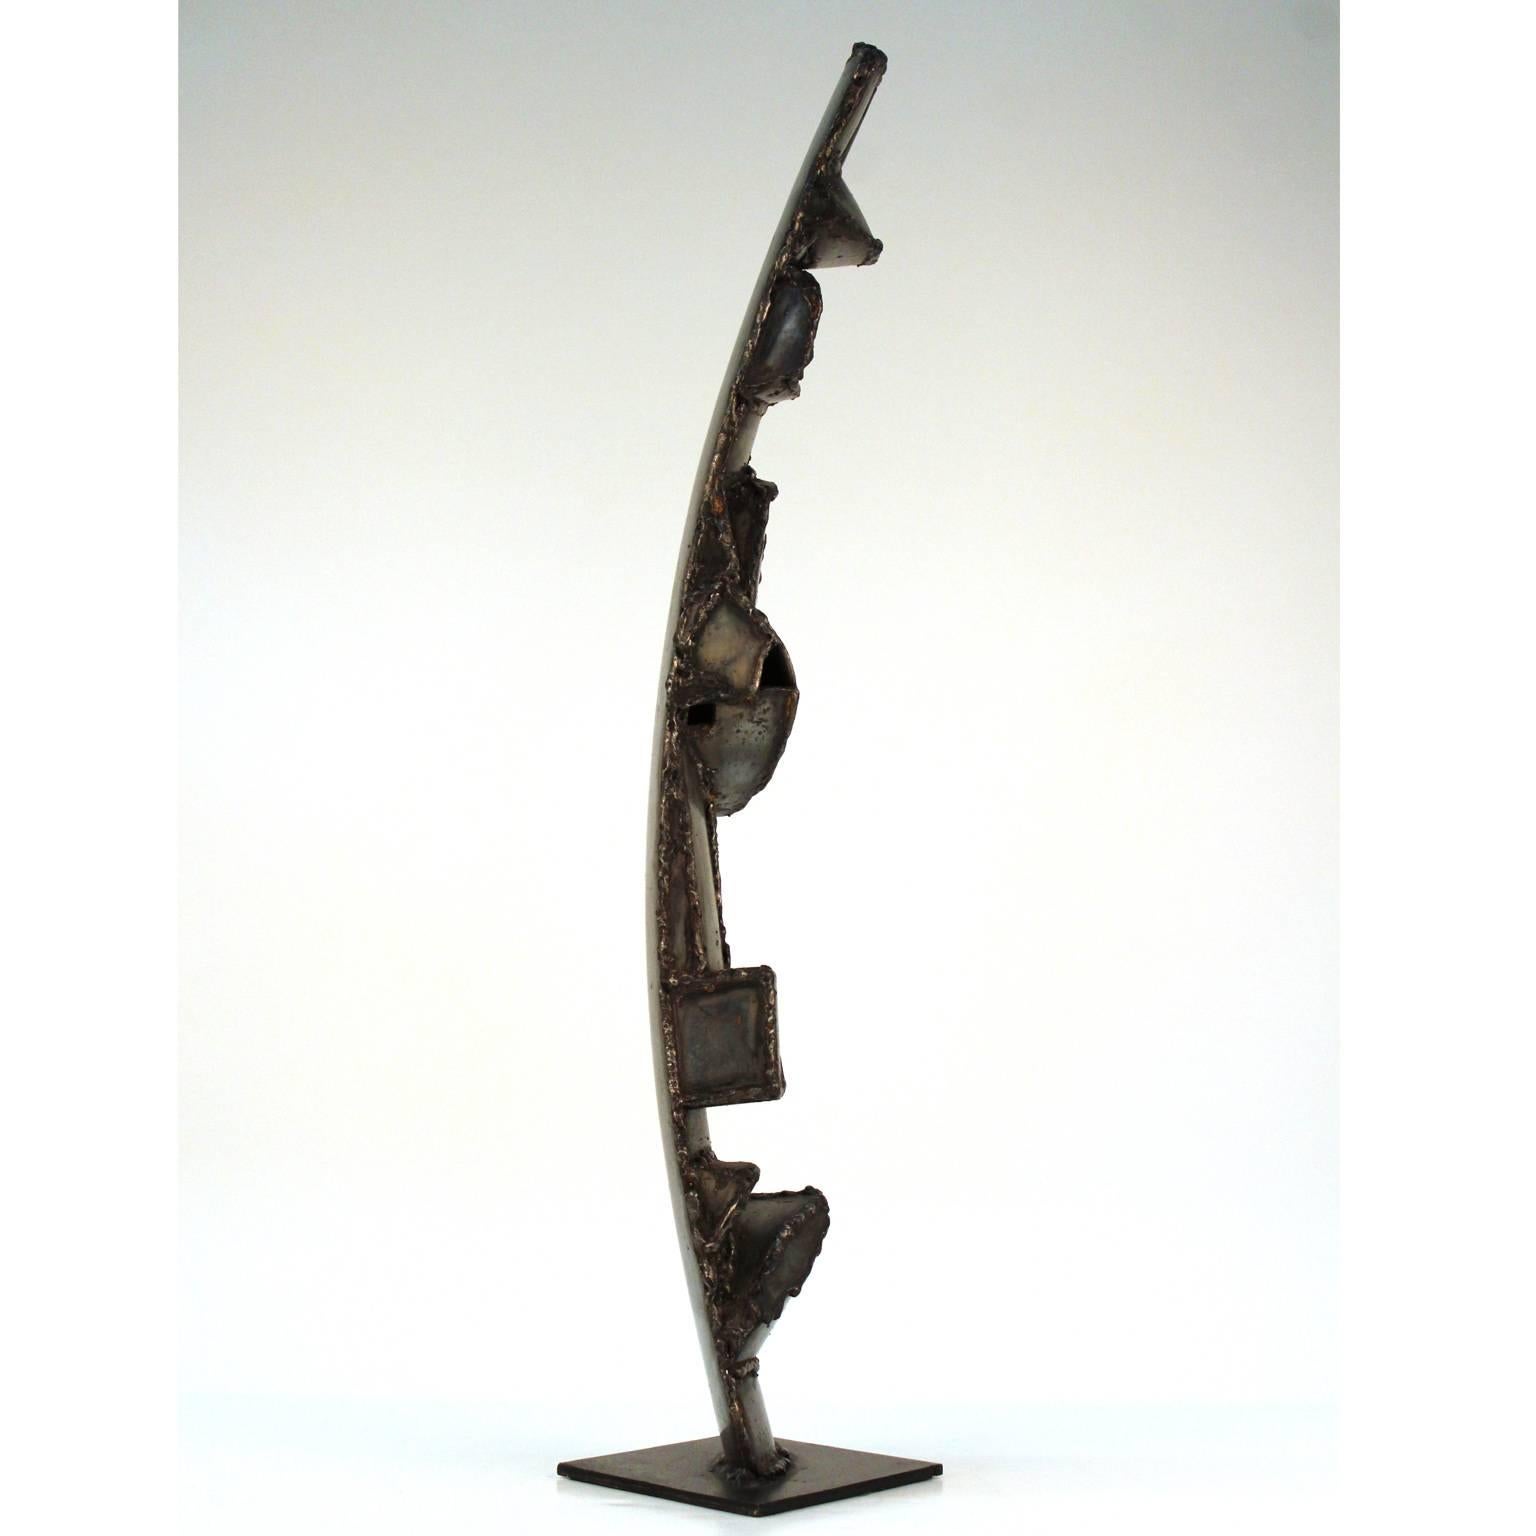 A Brutalist abstract sculpture made from welded car bumpers by Jason Seley (1919-1983), sculptor and dean of the Cornell University College of Architecture, Art and Planning. Excellent original condition, with some wear of age. Serial number etched